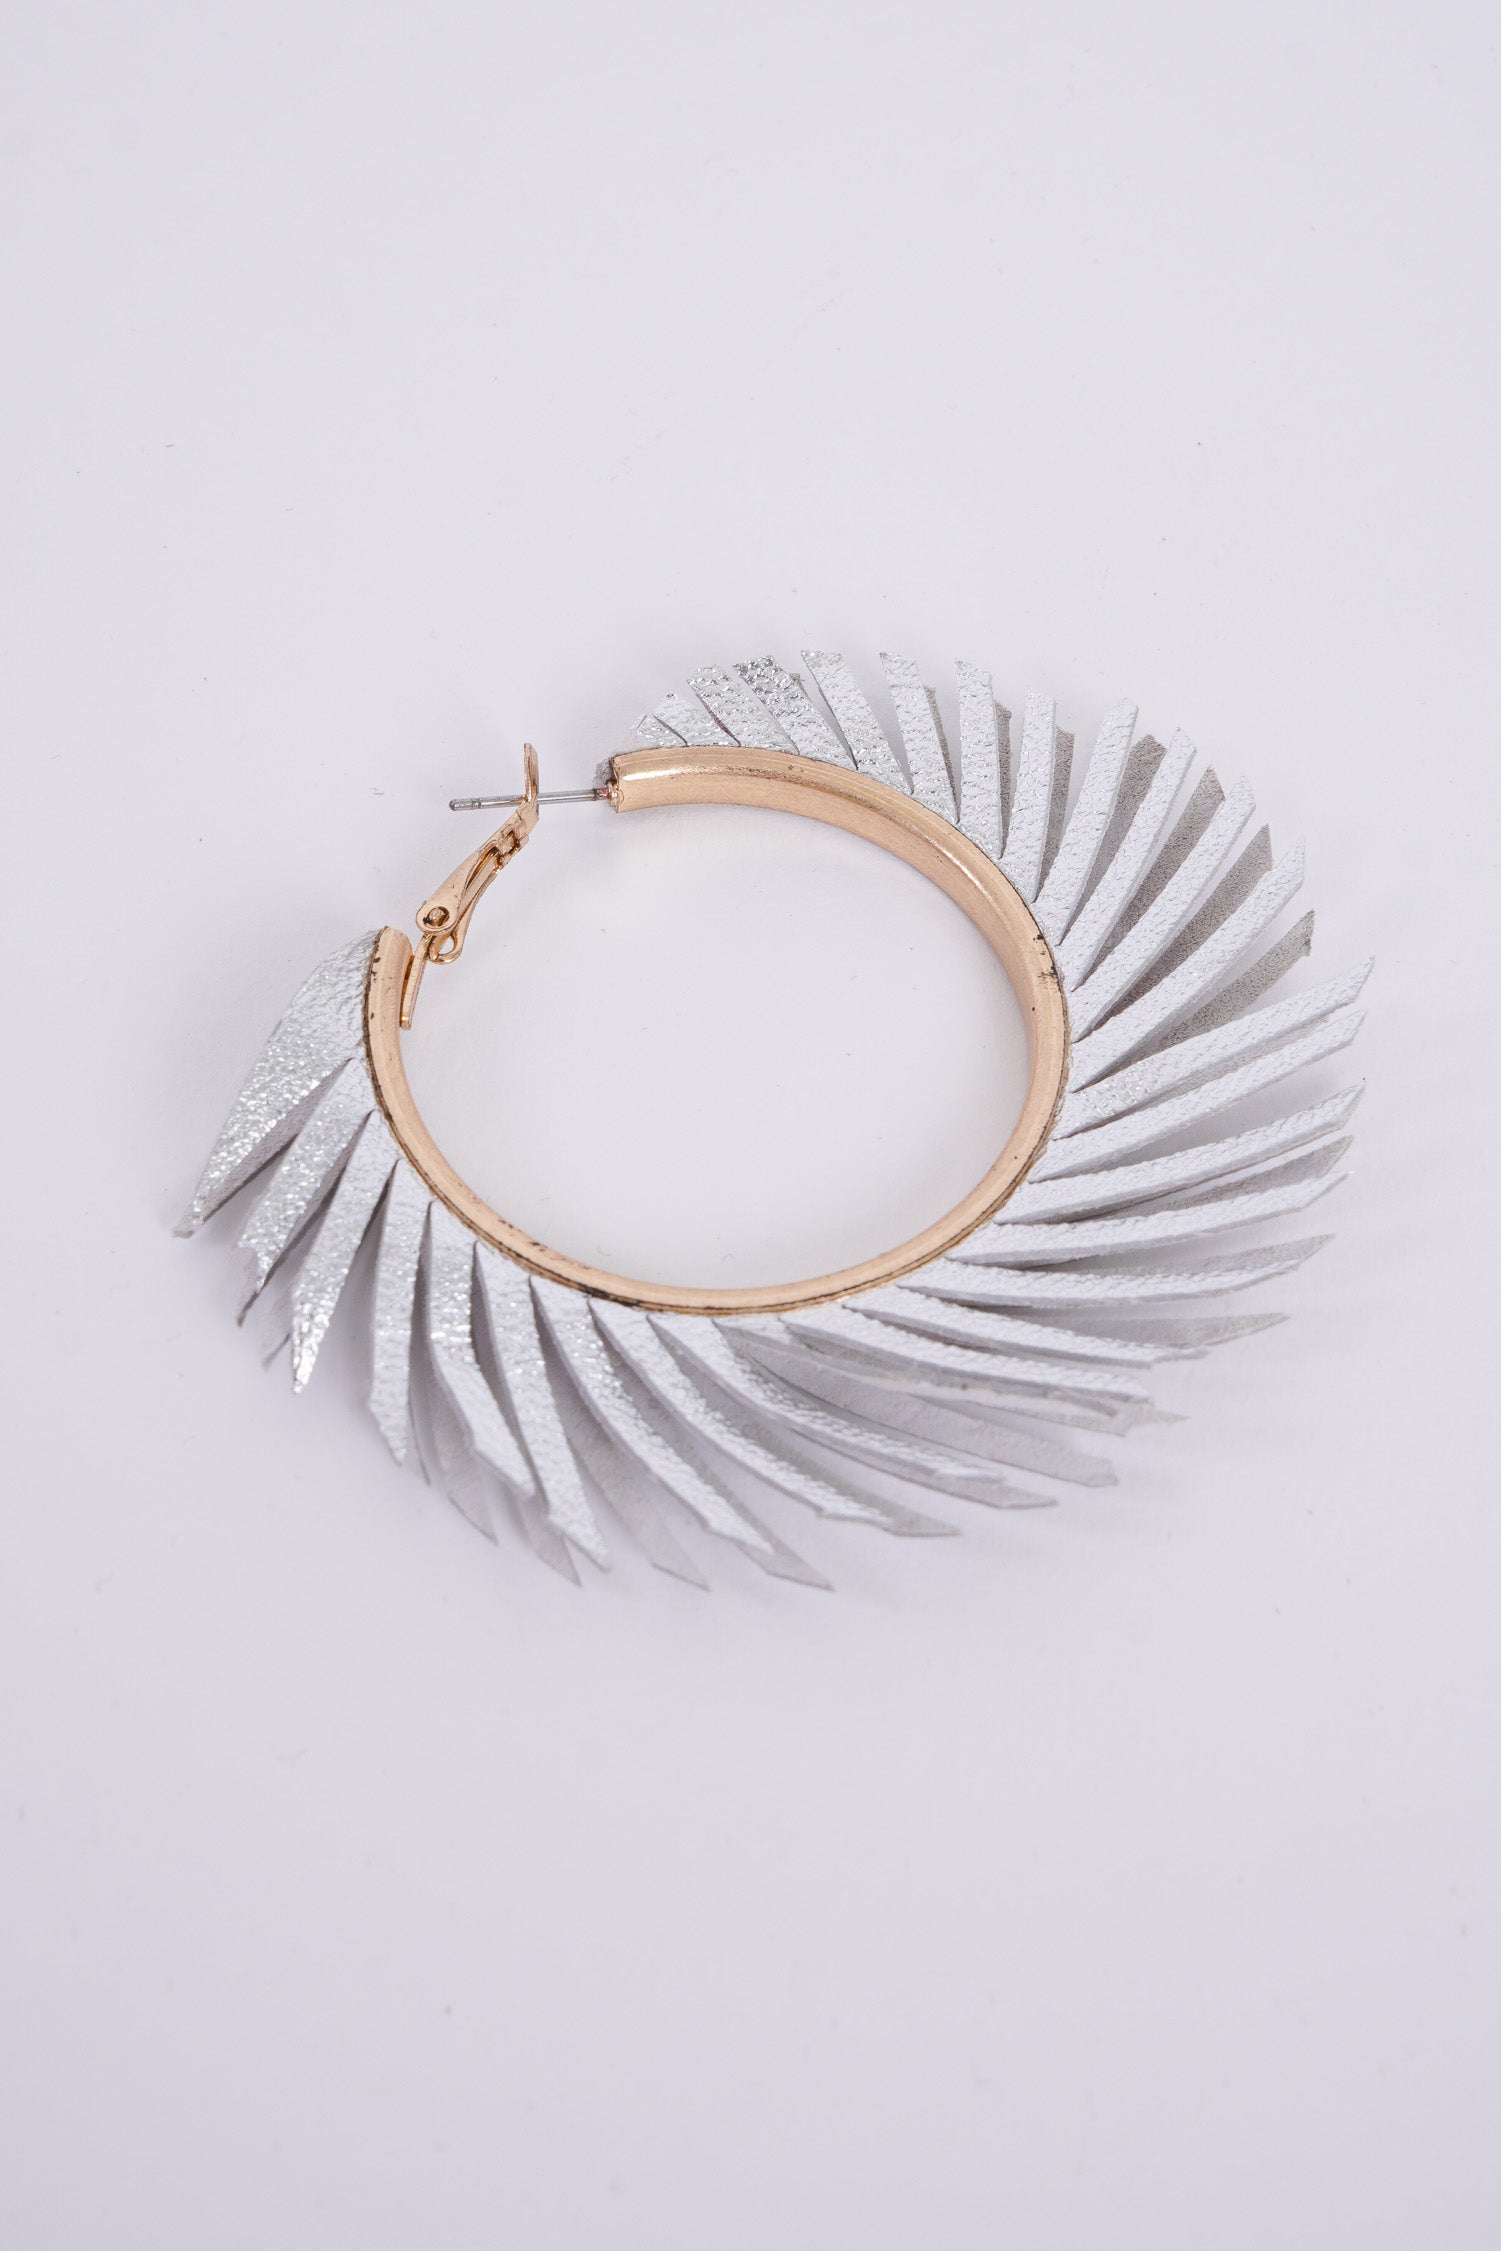 Photo shows a pair of faux leather, feather style hoops made from a metallic silver material. 